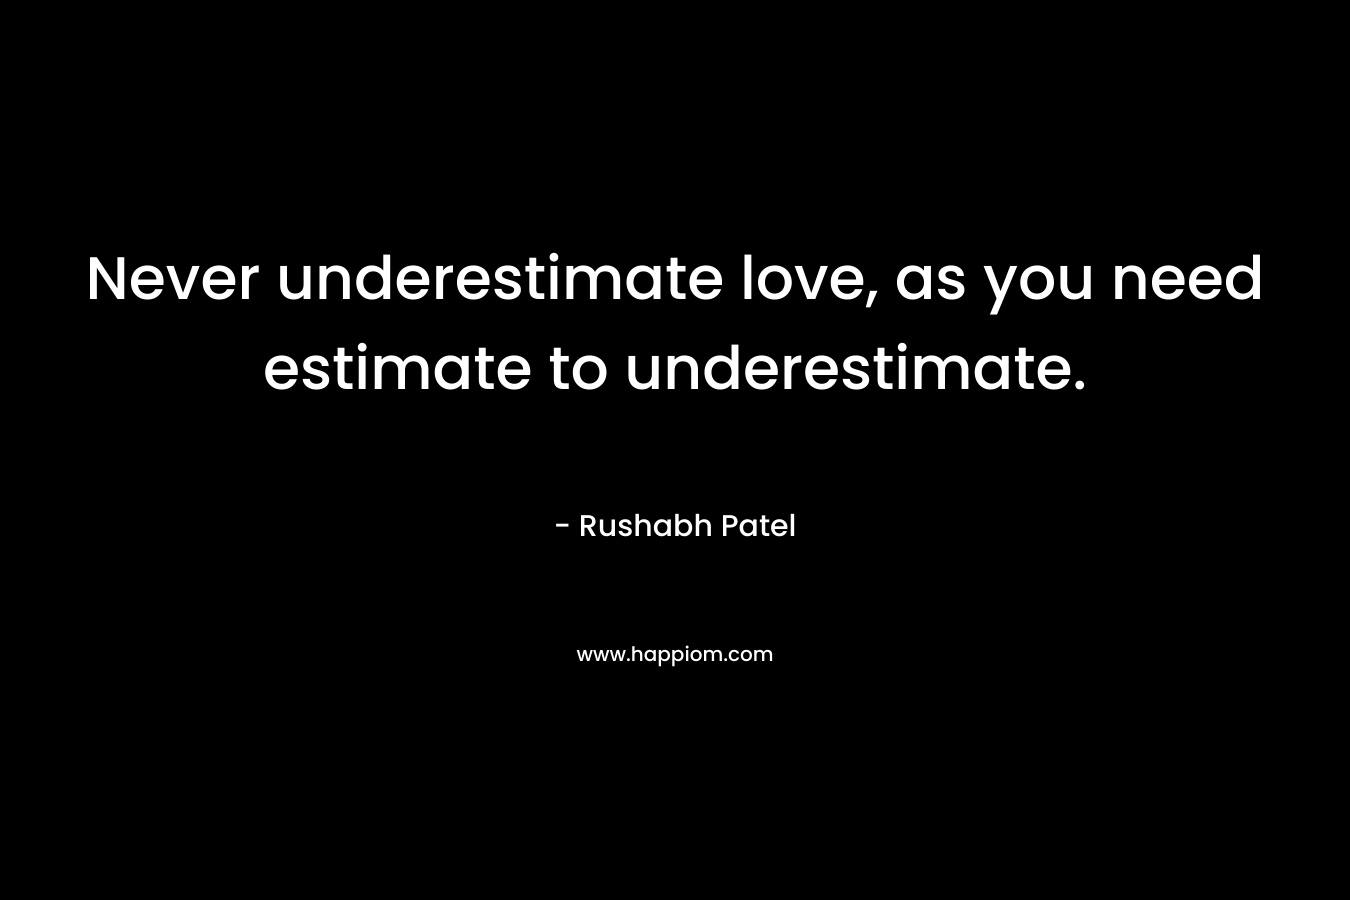 Never underestimate love, as you need estimate to underestimate.